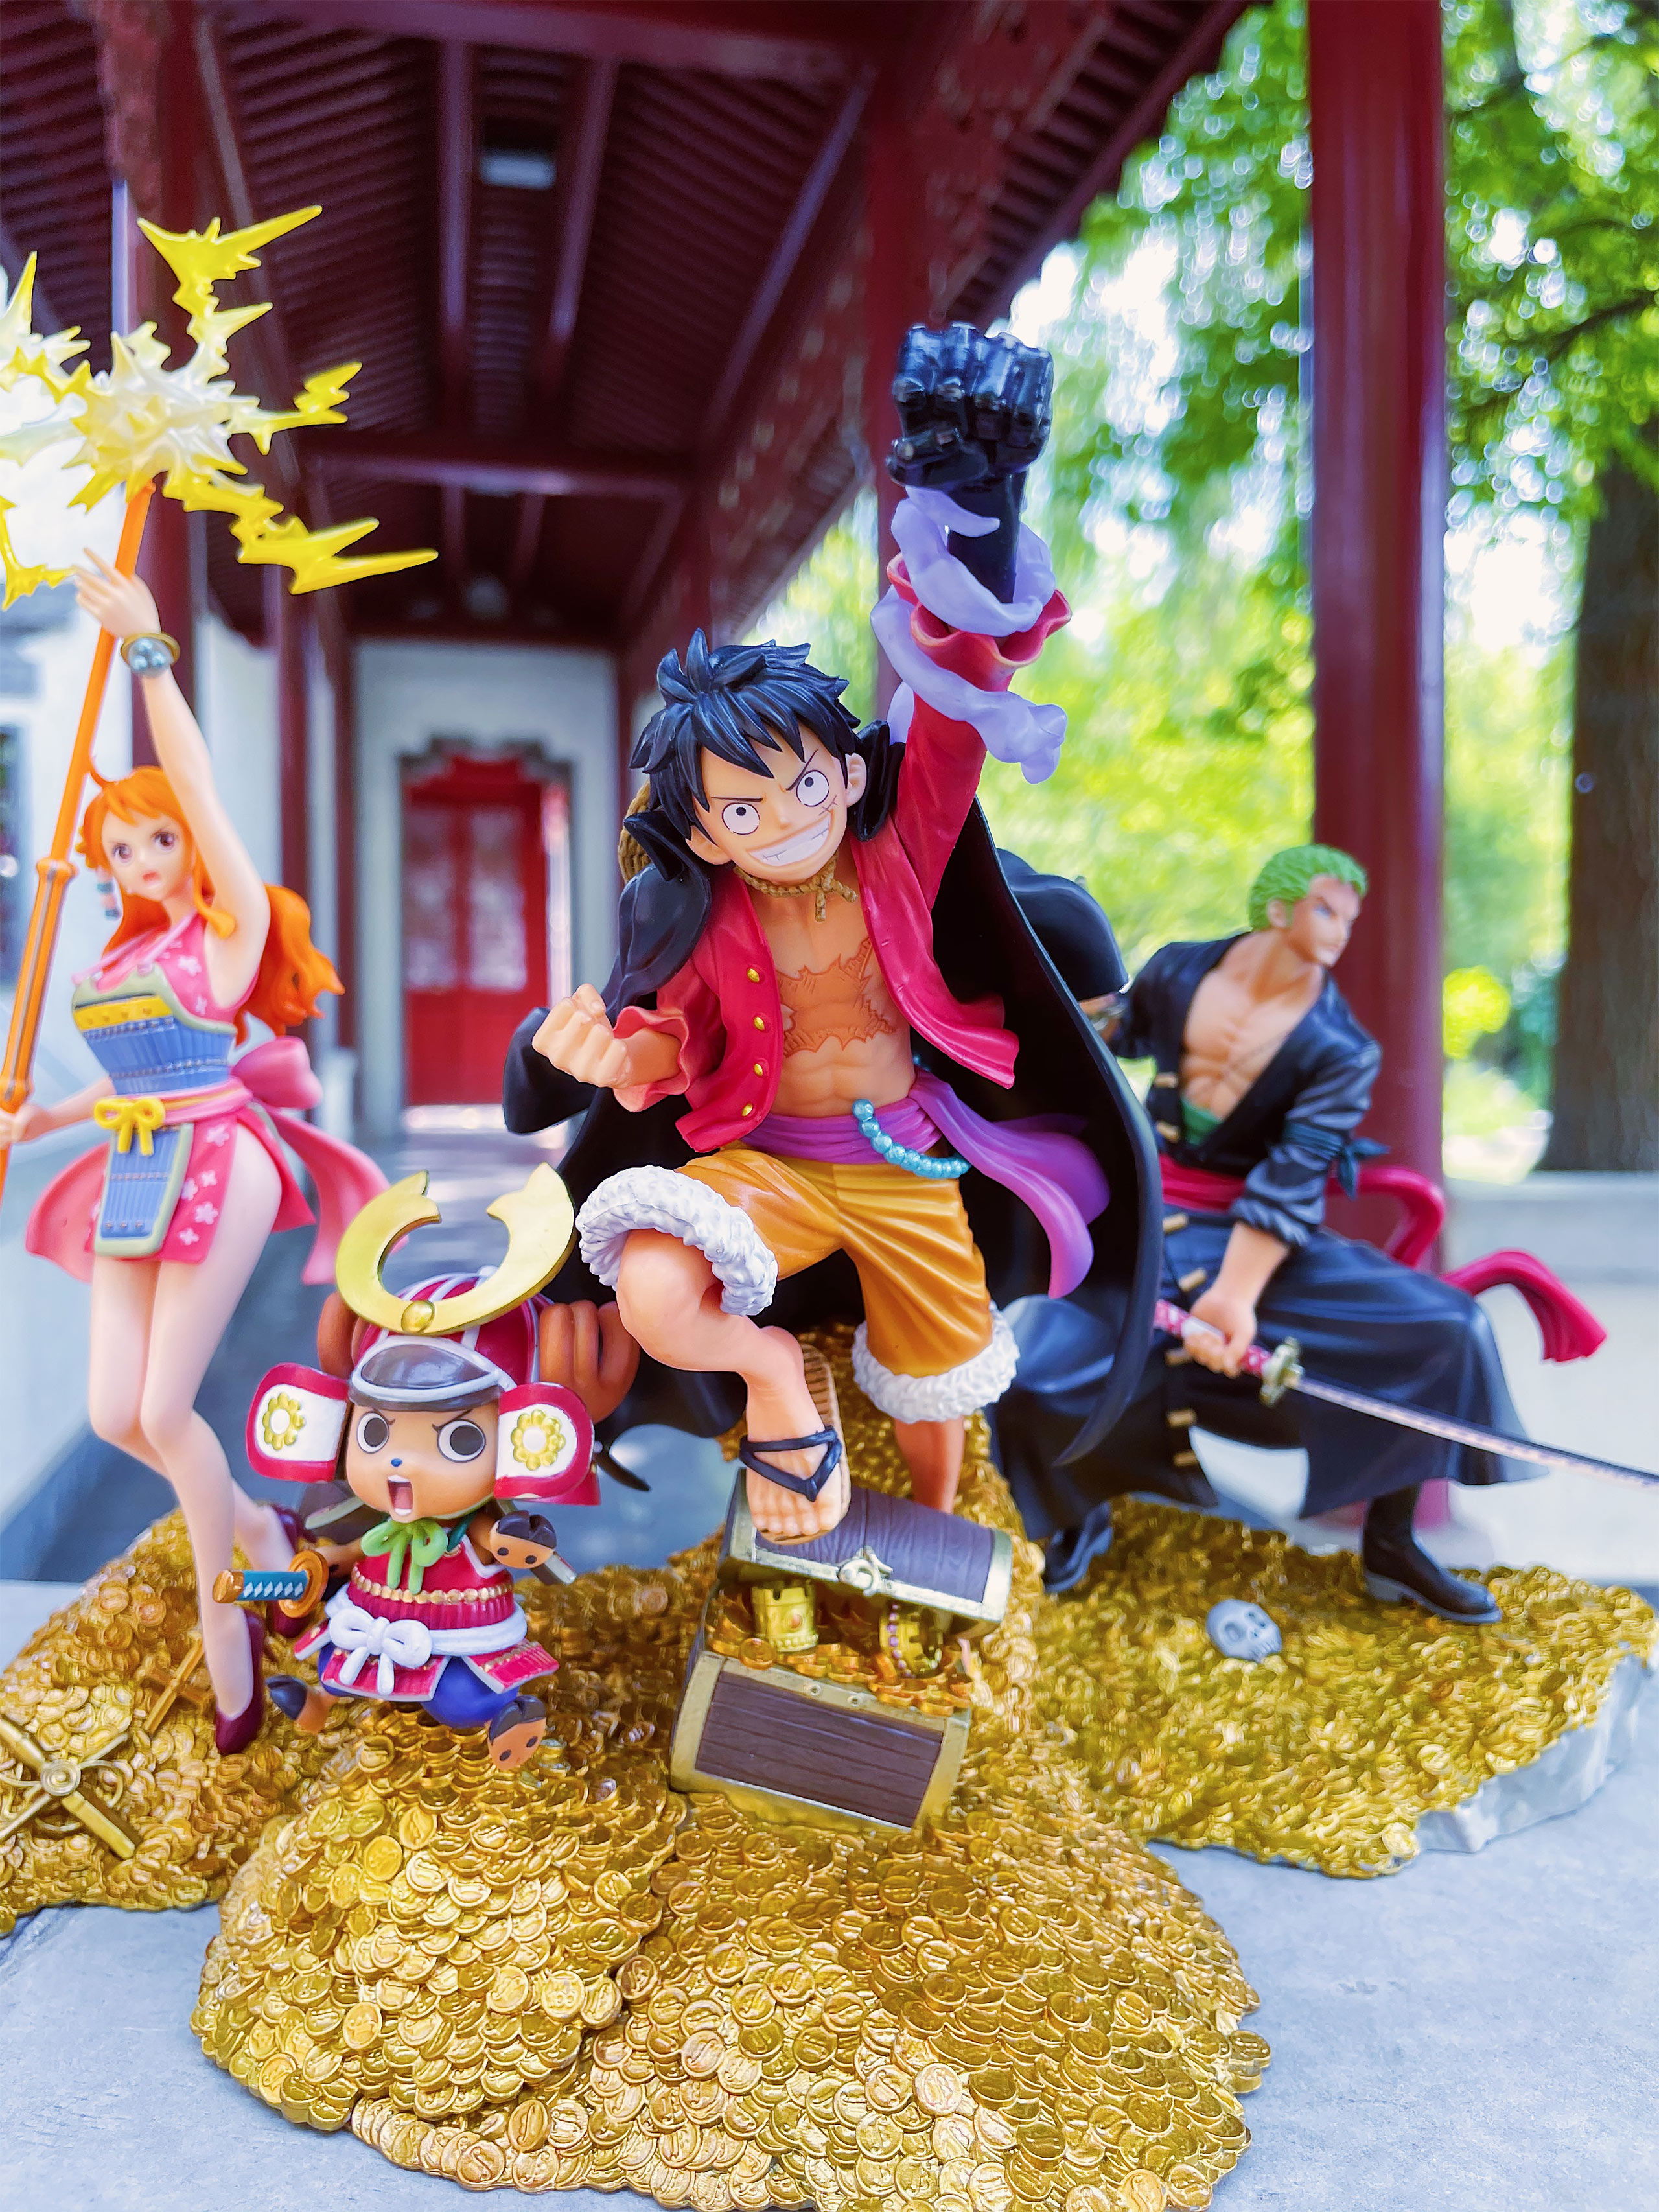 One Piece - Luffy with Chopper Figure